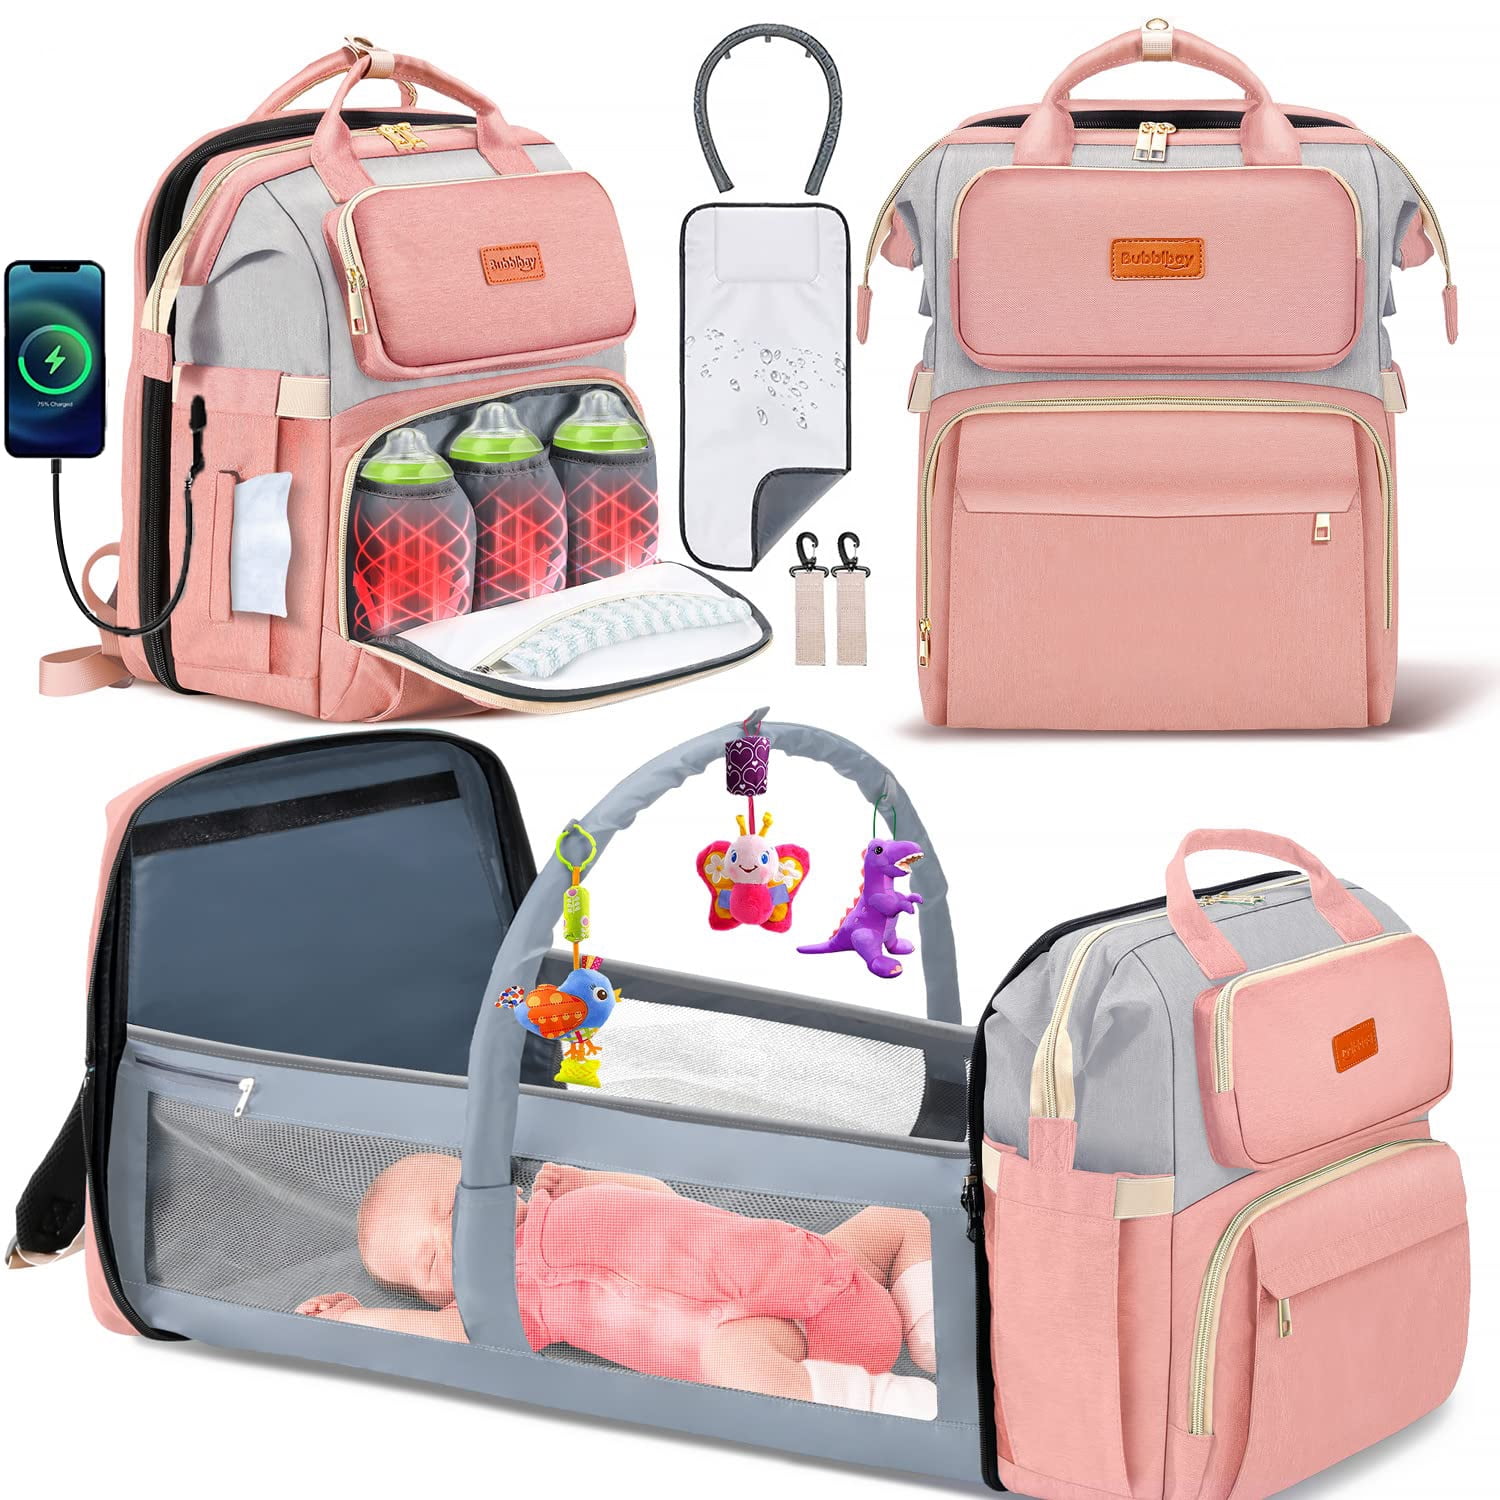 Prospect Company Credential Diaper Bag Backpack, Campmoy 8 in 1 Large Diaper Bag with Changing Station,  900D Oxford Waterproof Diaper Bag with Unique Toy Hanging Rod Bassinet for  Boys Girl(Pink) - Walmart.com